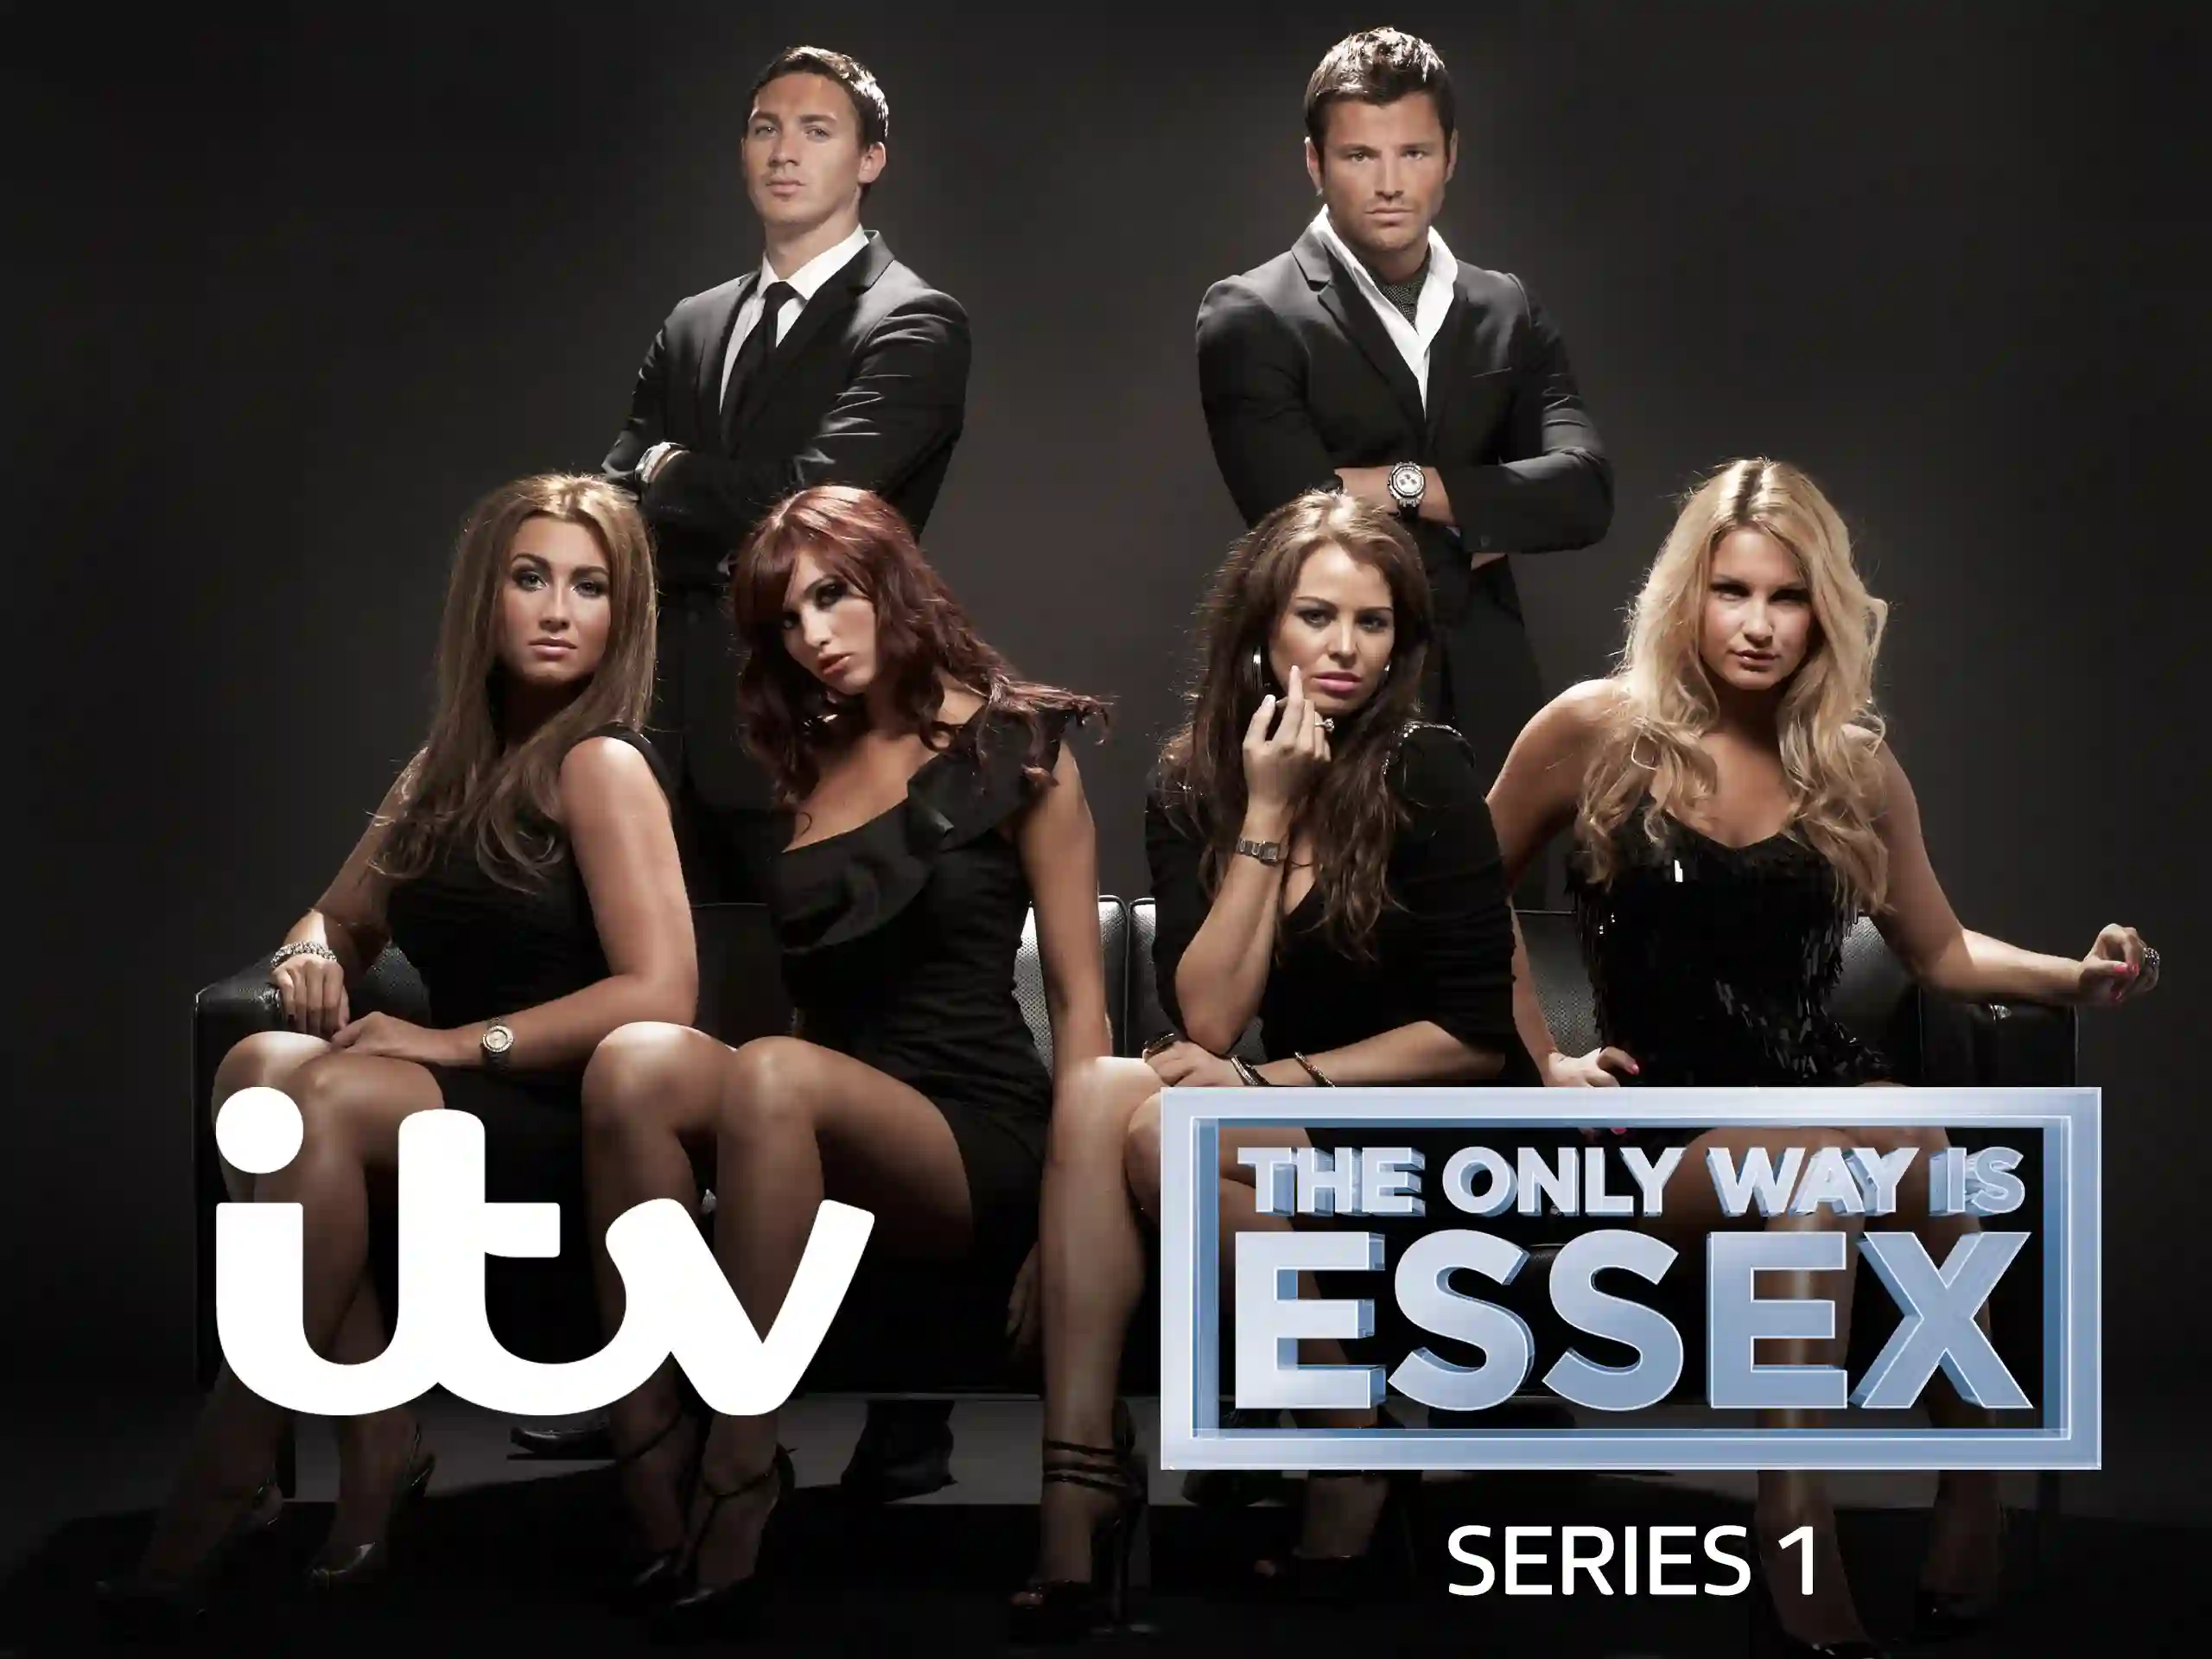 How to Watch The Only Way is Essex From Anywhere